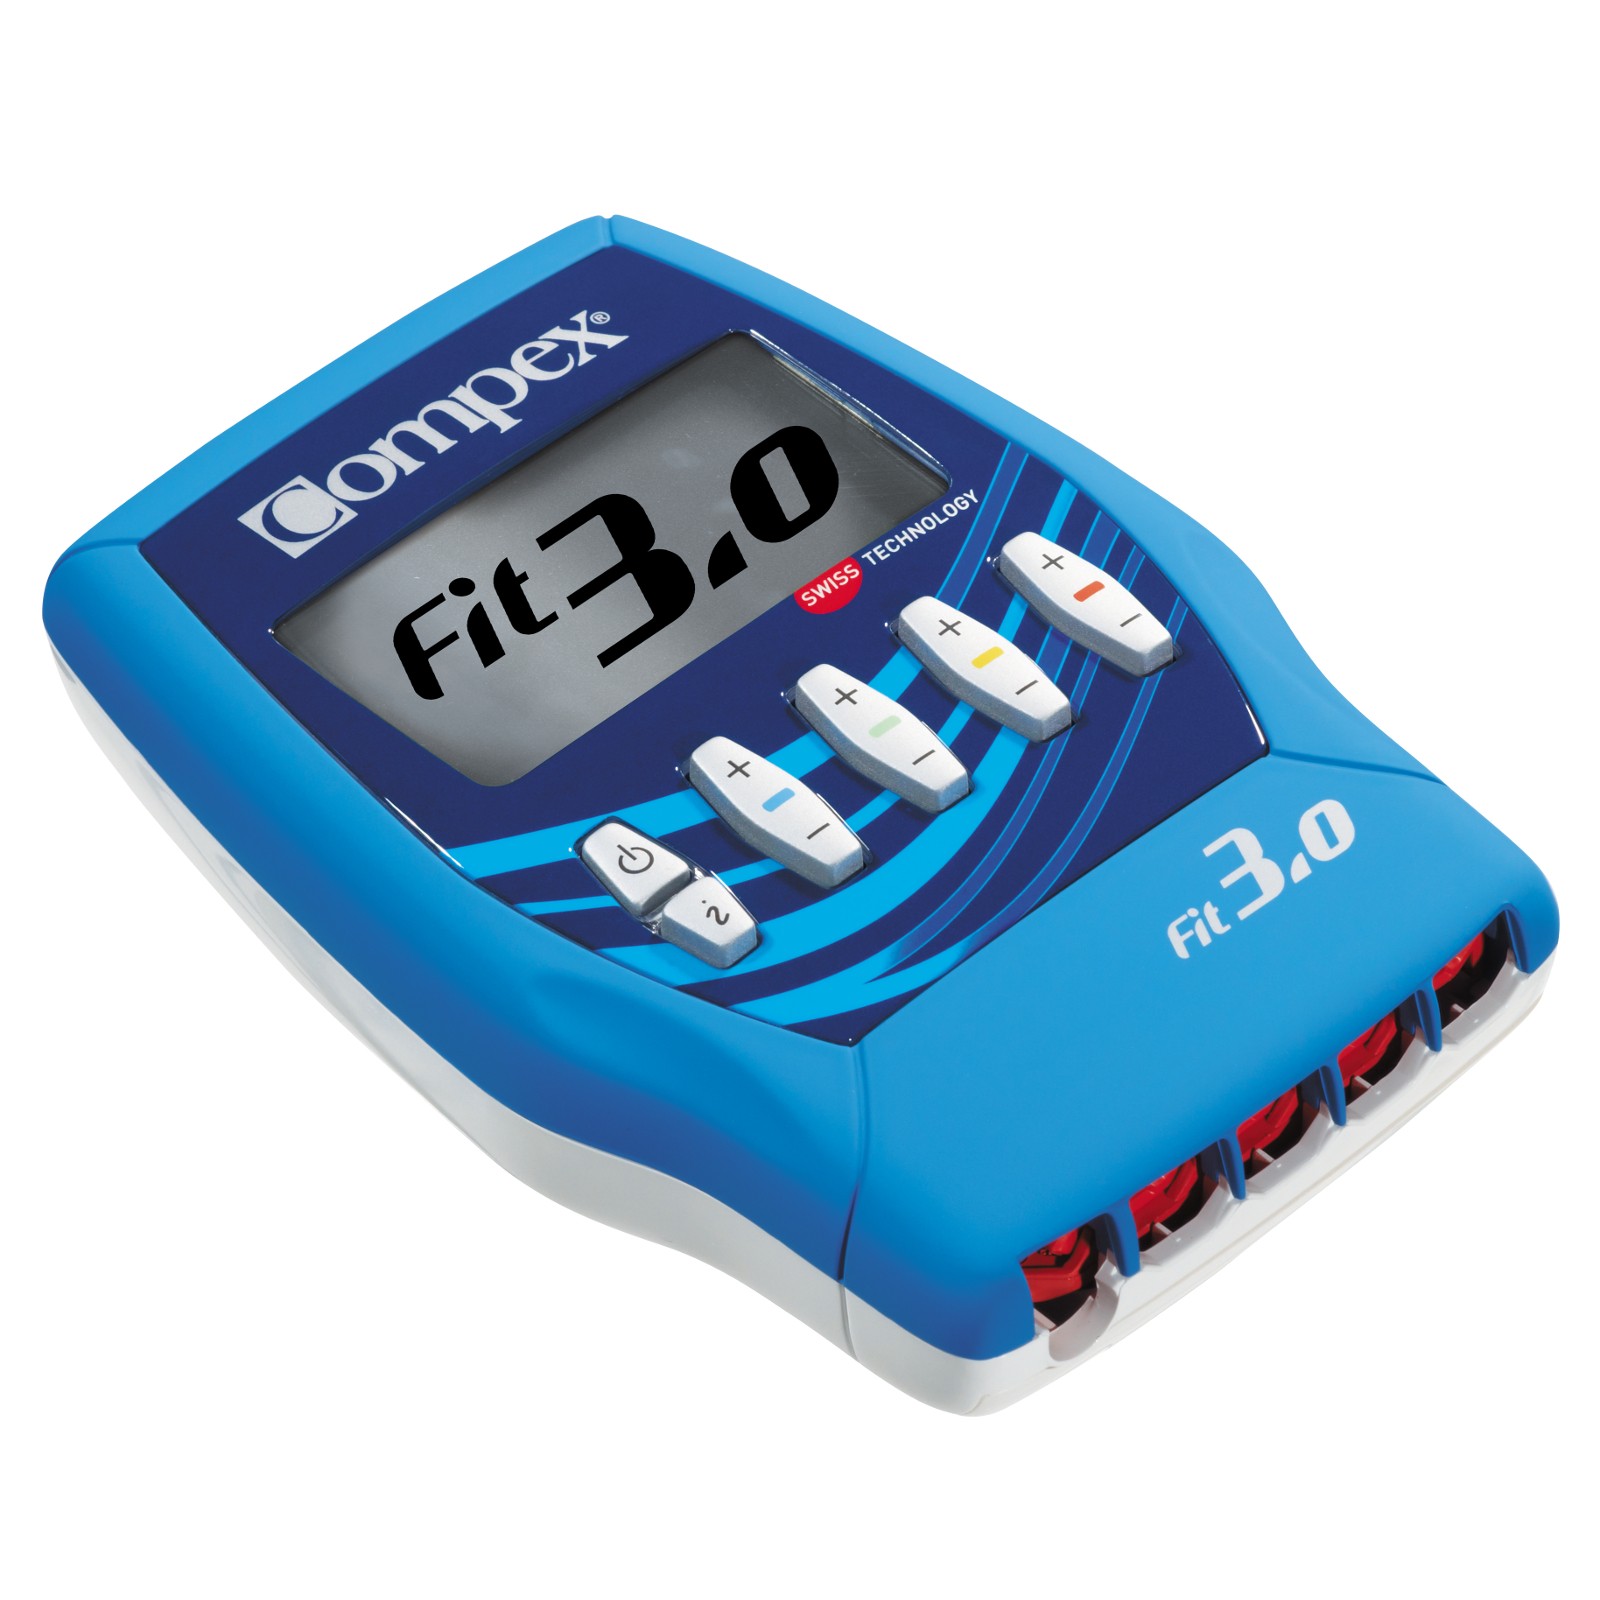 Compex FIT 3.0 CO1 2534116 Muscle Stimulation Device Blue : :  Sports & Outdoors